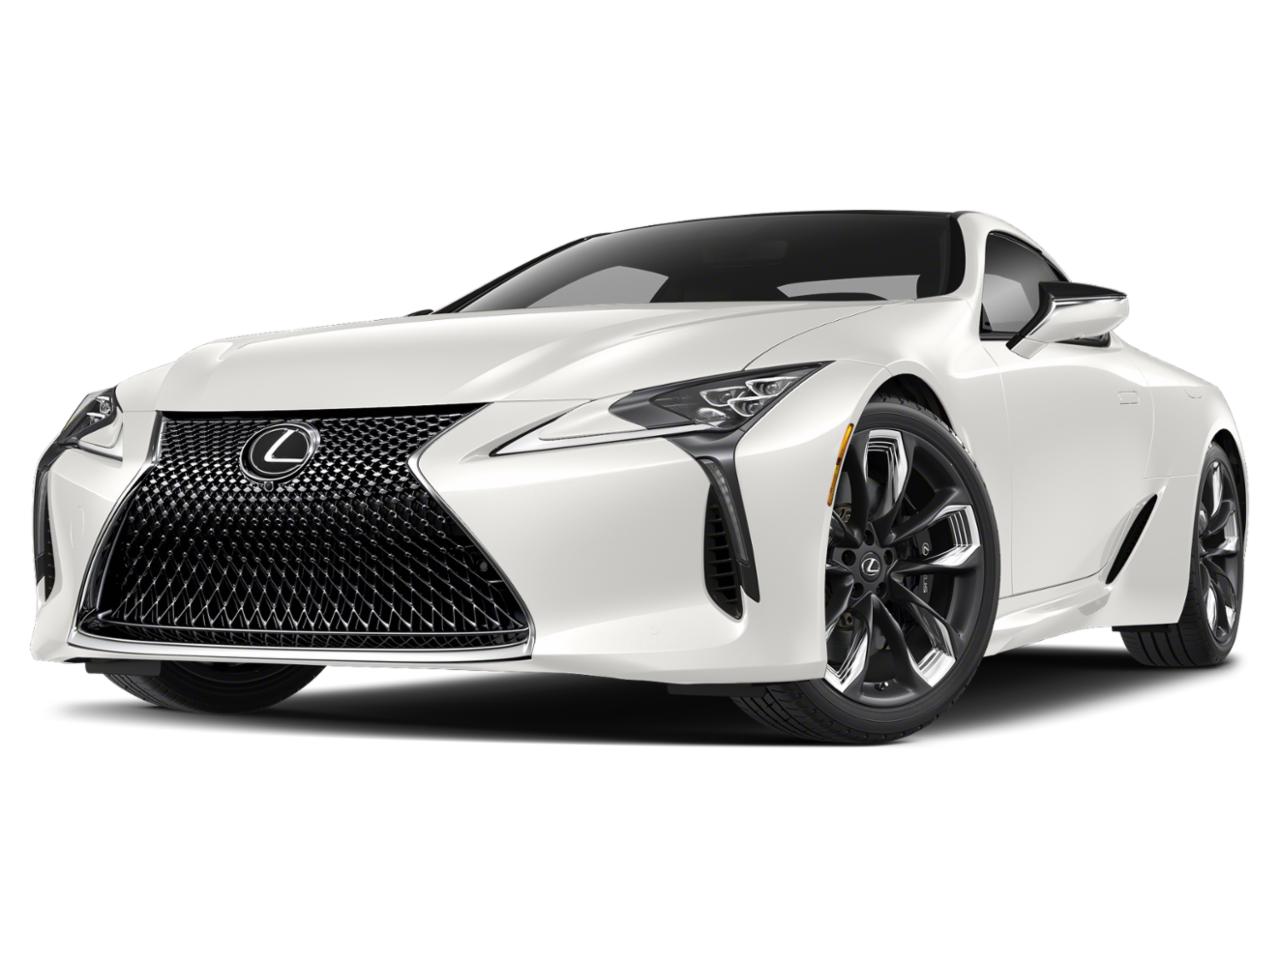 Search New Lexus LC Models for Sale in Dallas, Fort Worth, Houston